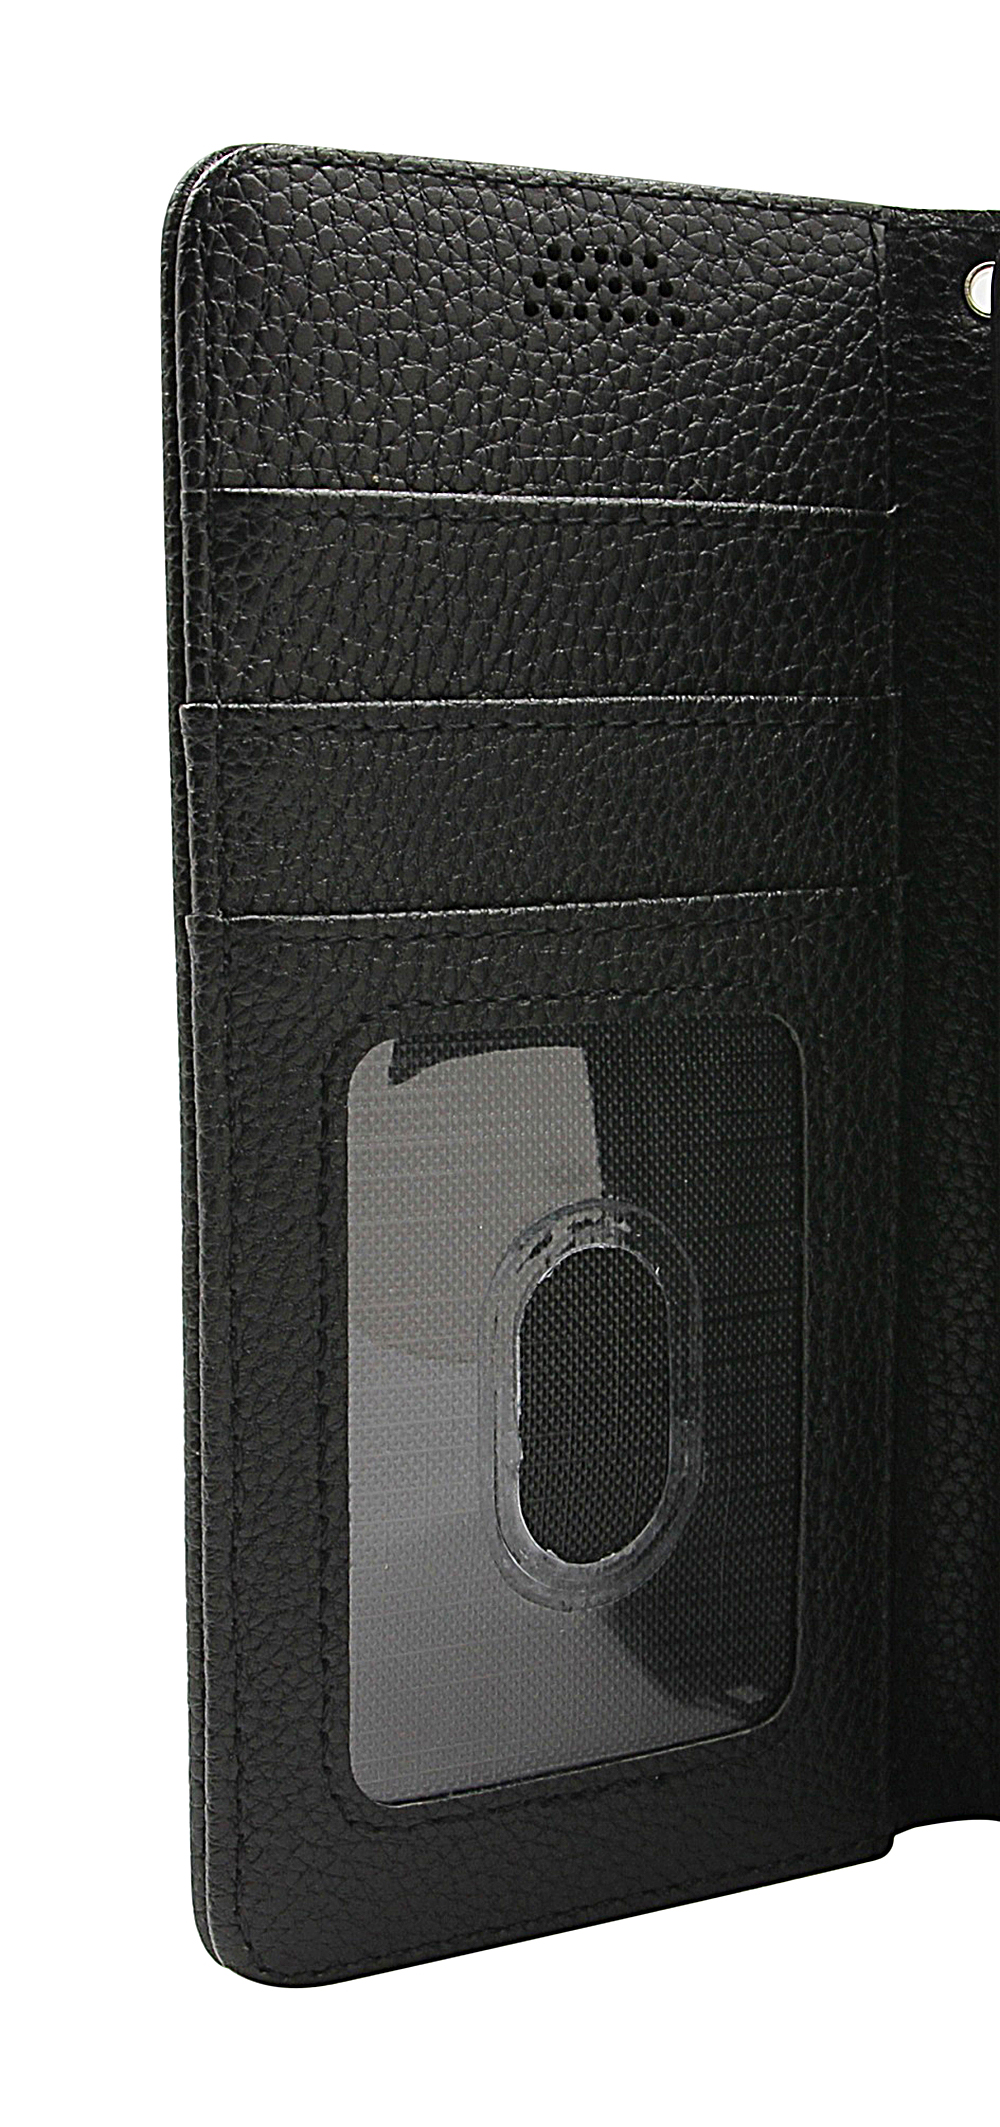 New Standcase Wallet OnePlus Nord N100